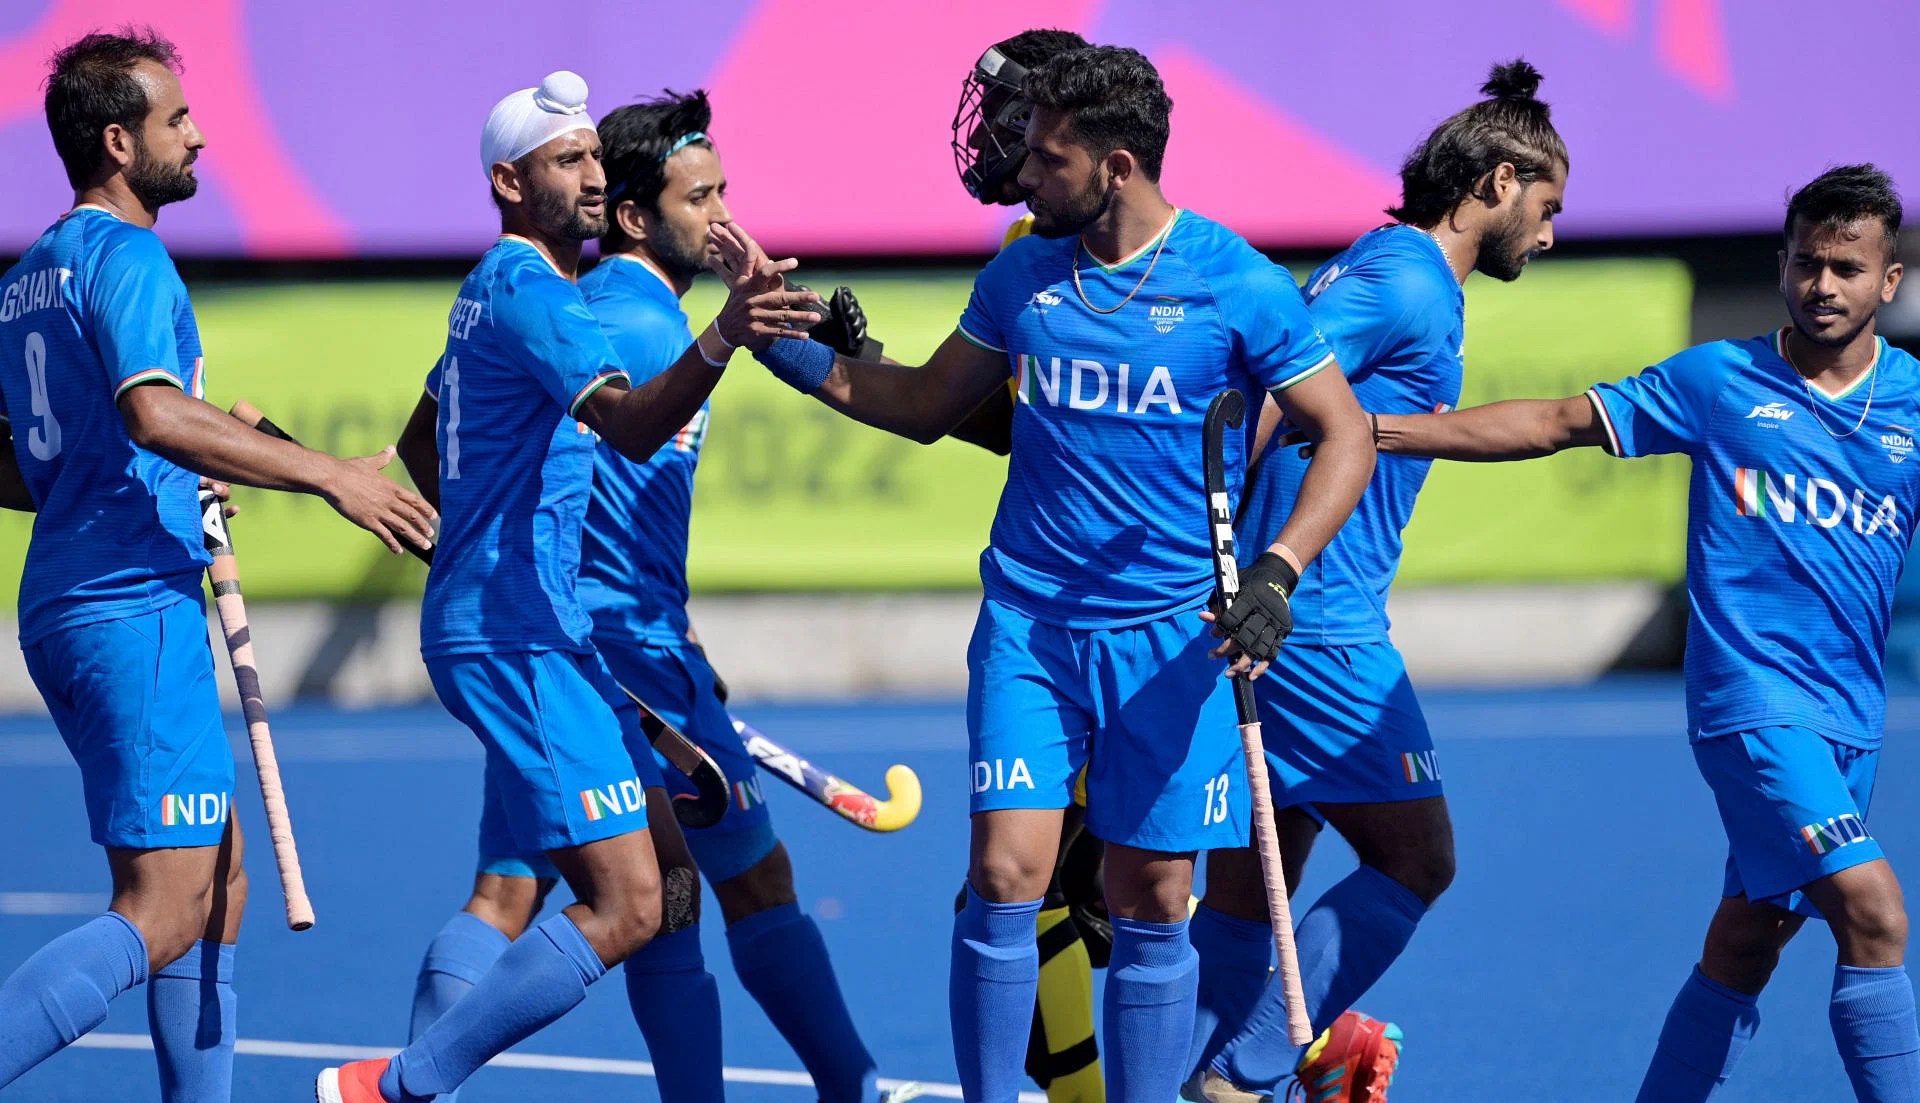 CWG 2022 Men's Hockey Live: Manpreet Singh and co eye final berth as they prepare for India vs South Africa men’s hockey semifinal, follow IND vs SA hockey live updates